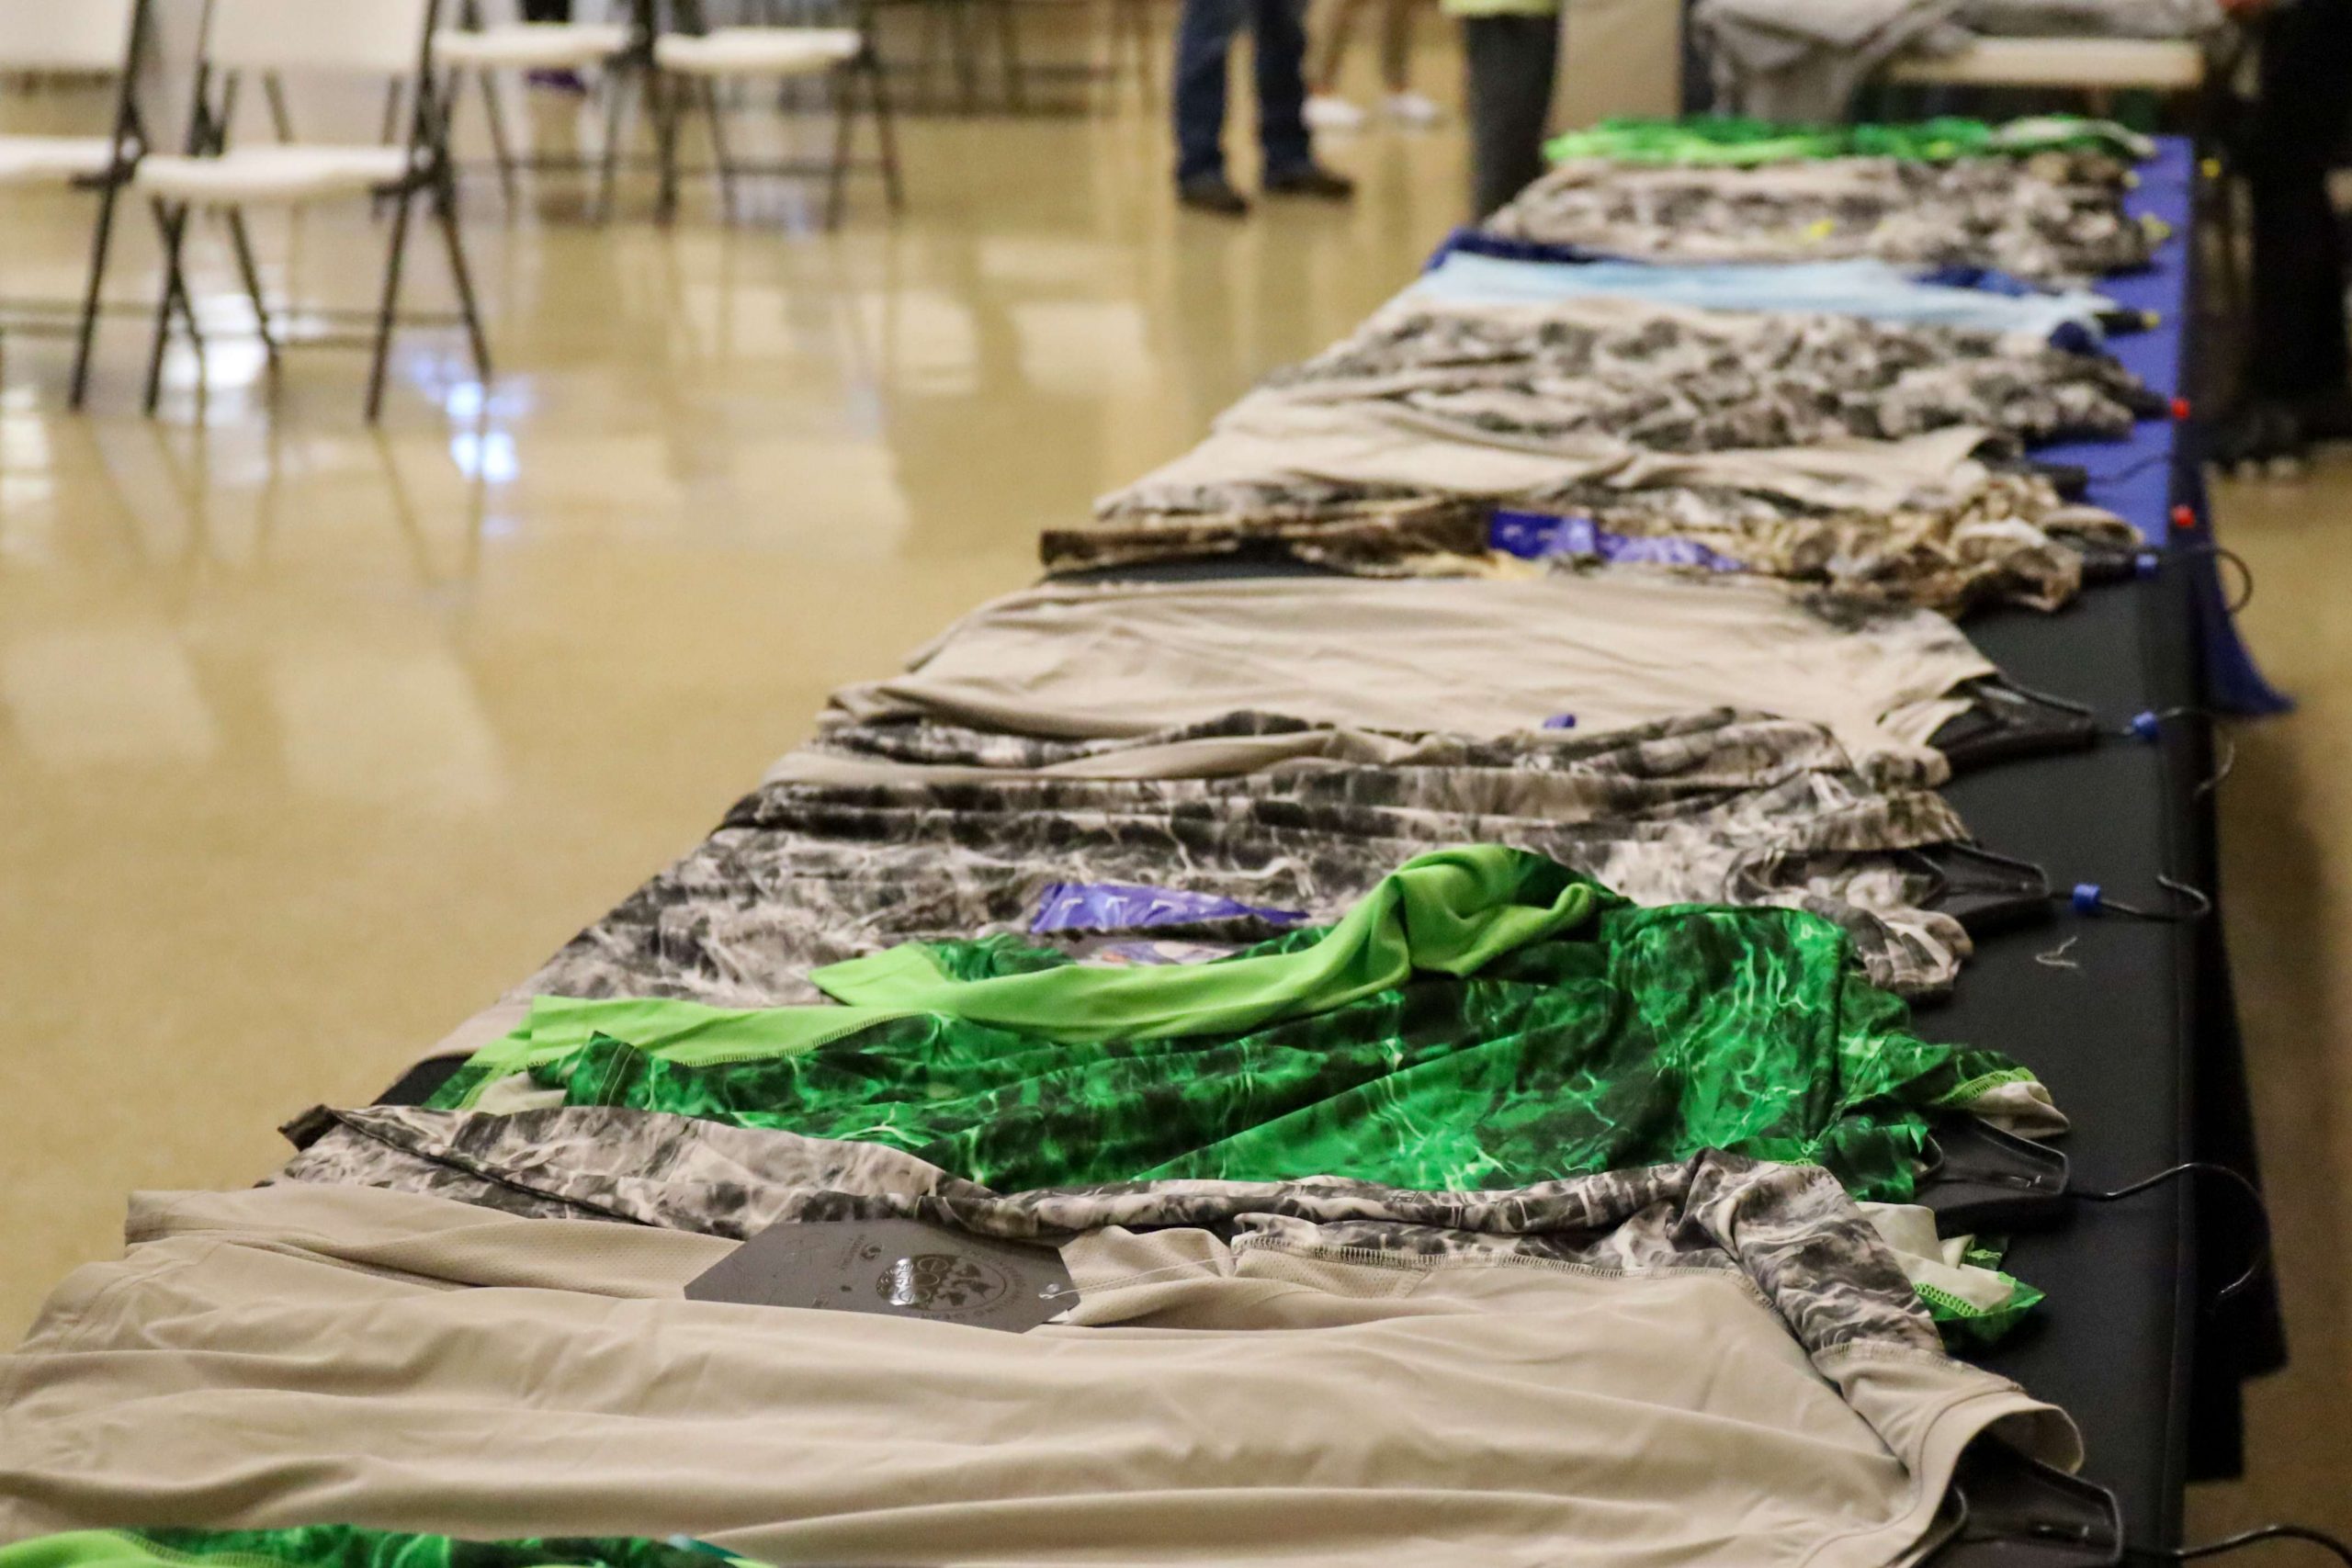 Mossy Oak brought a wide selection of shirts and apparel for the anglers to choose from.